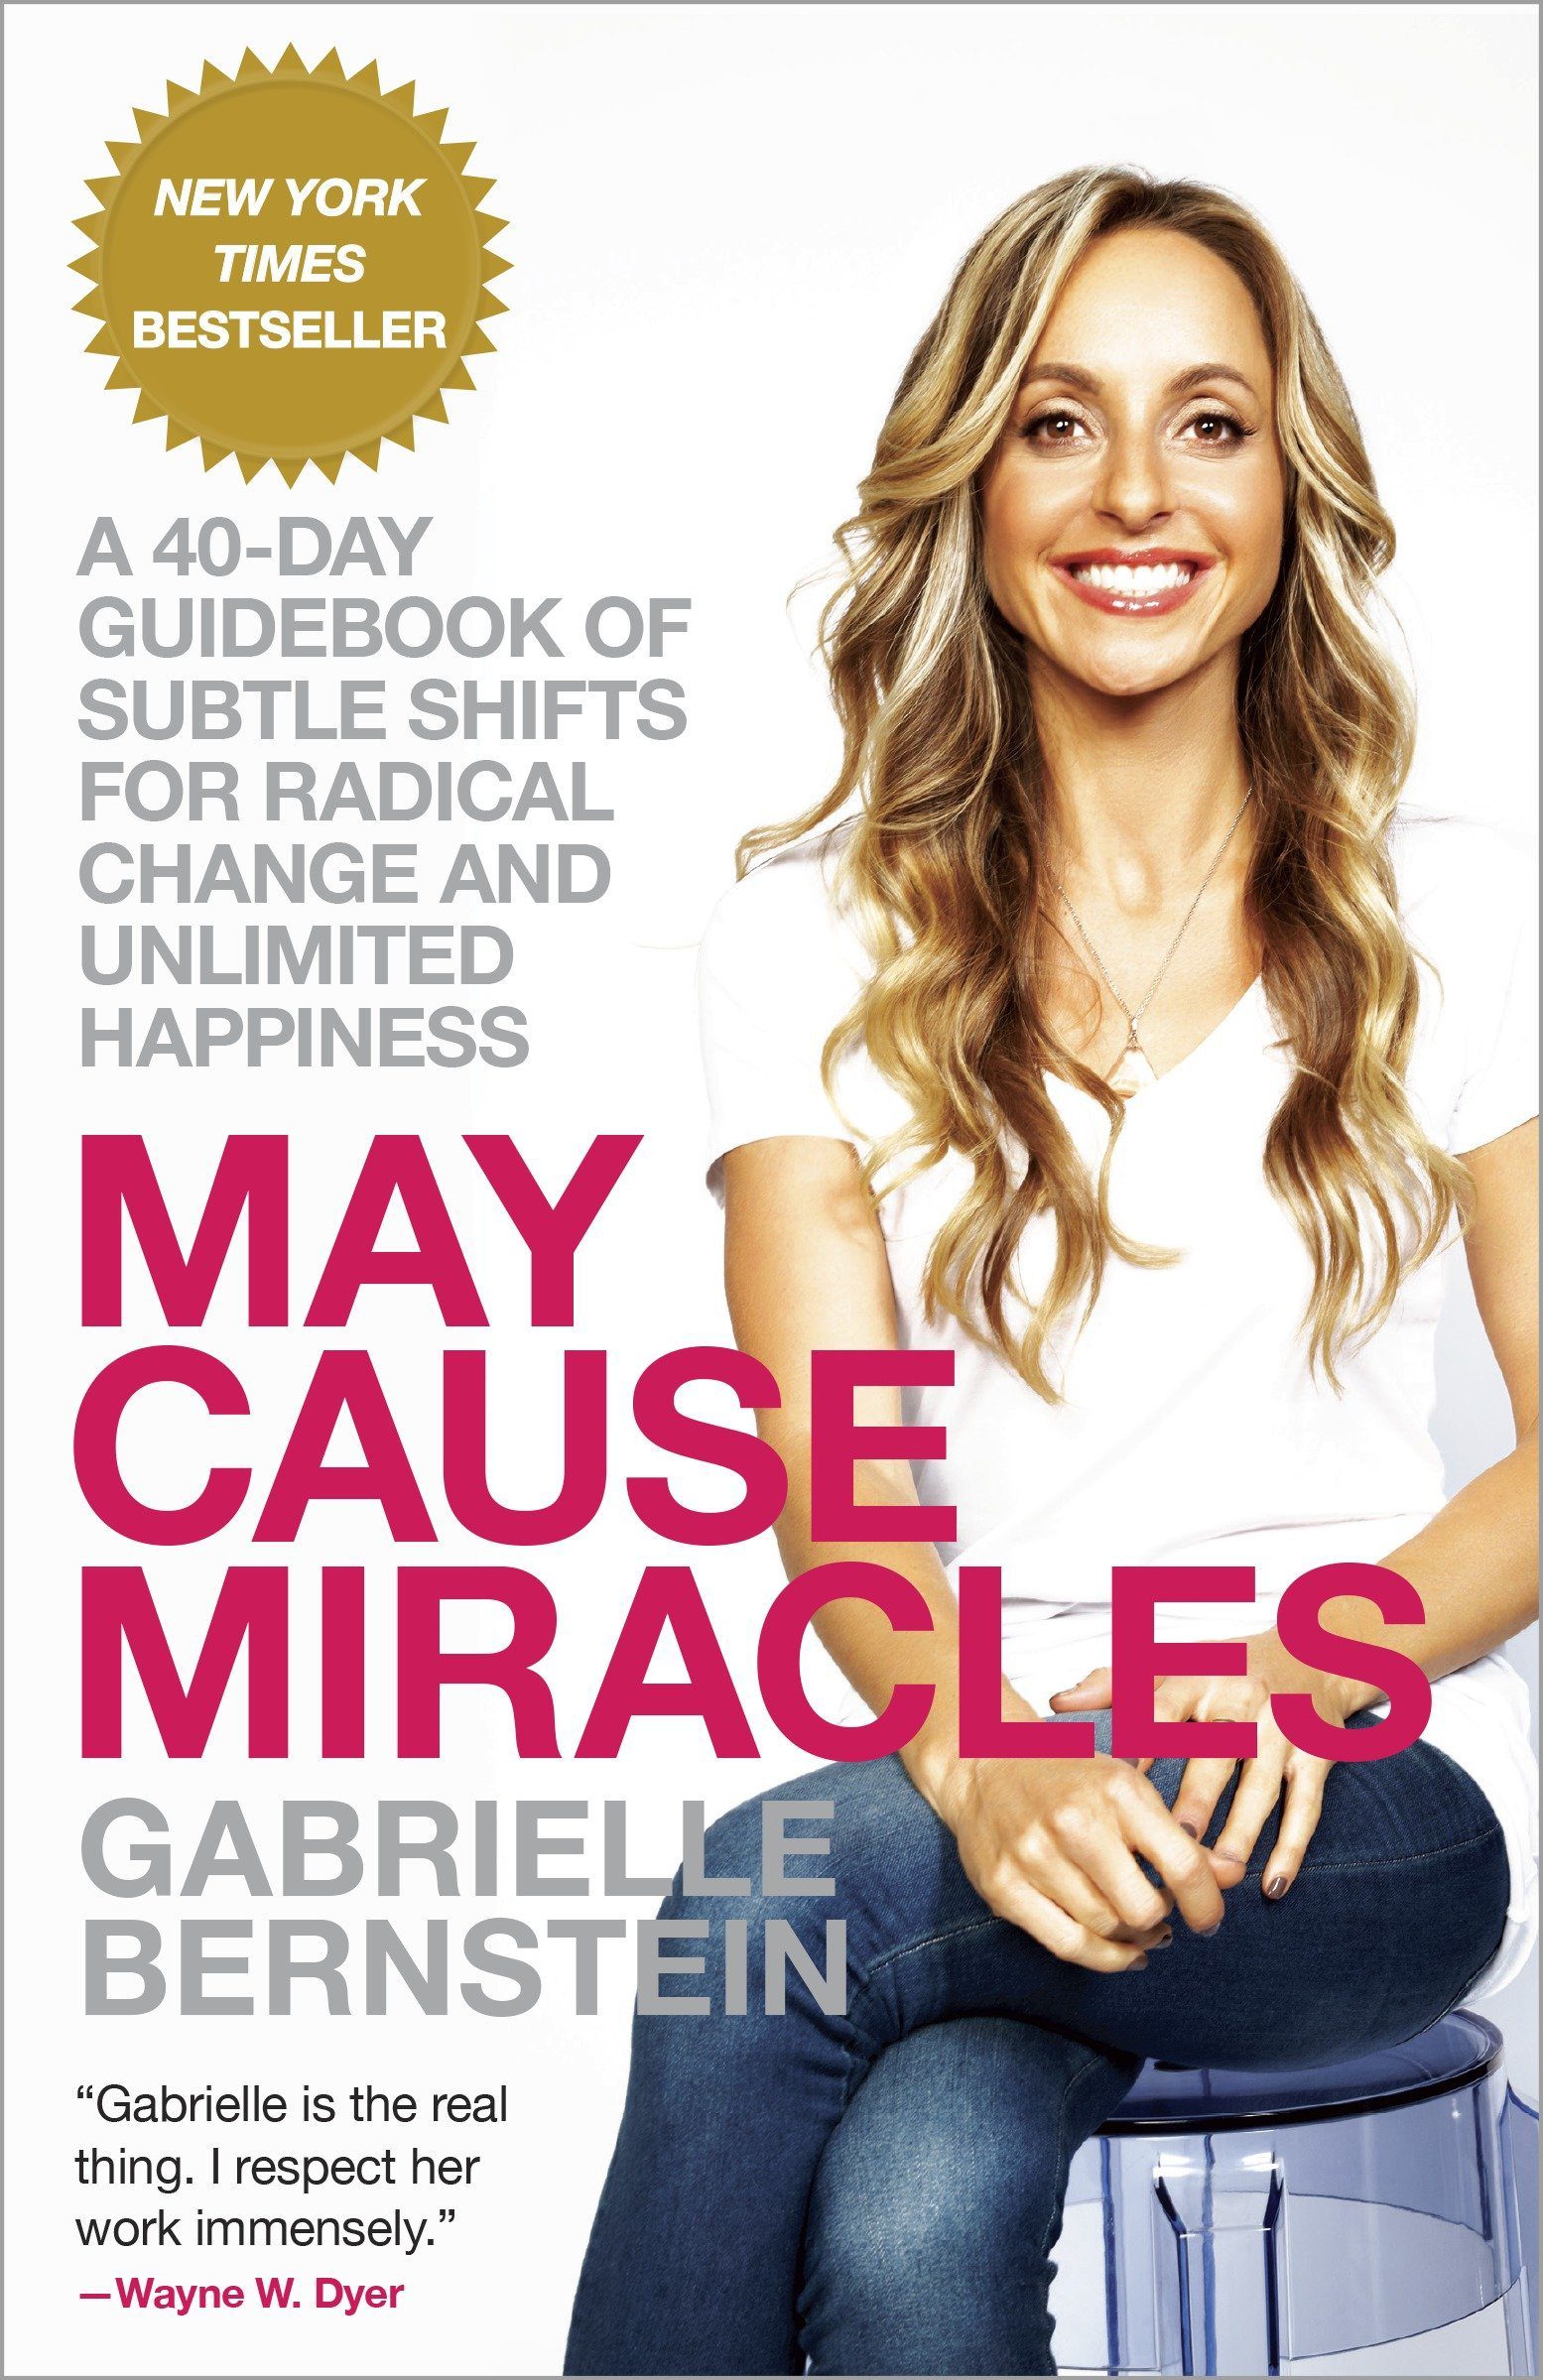 May Cause Miracles- A 40-Day Guidebook of Subtle Shifts for Radical Change and Unlimited Happiness